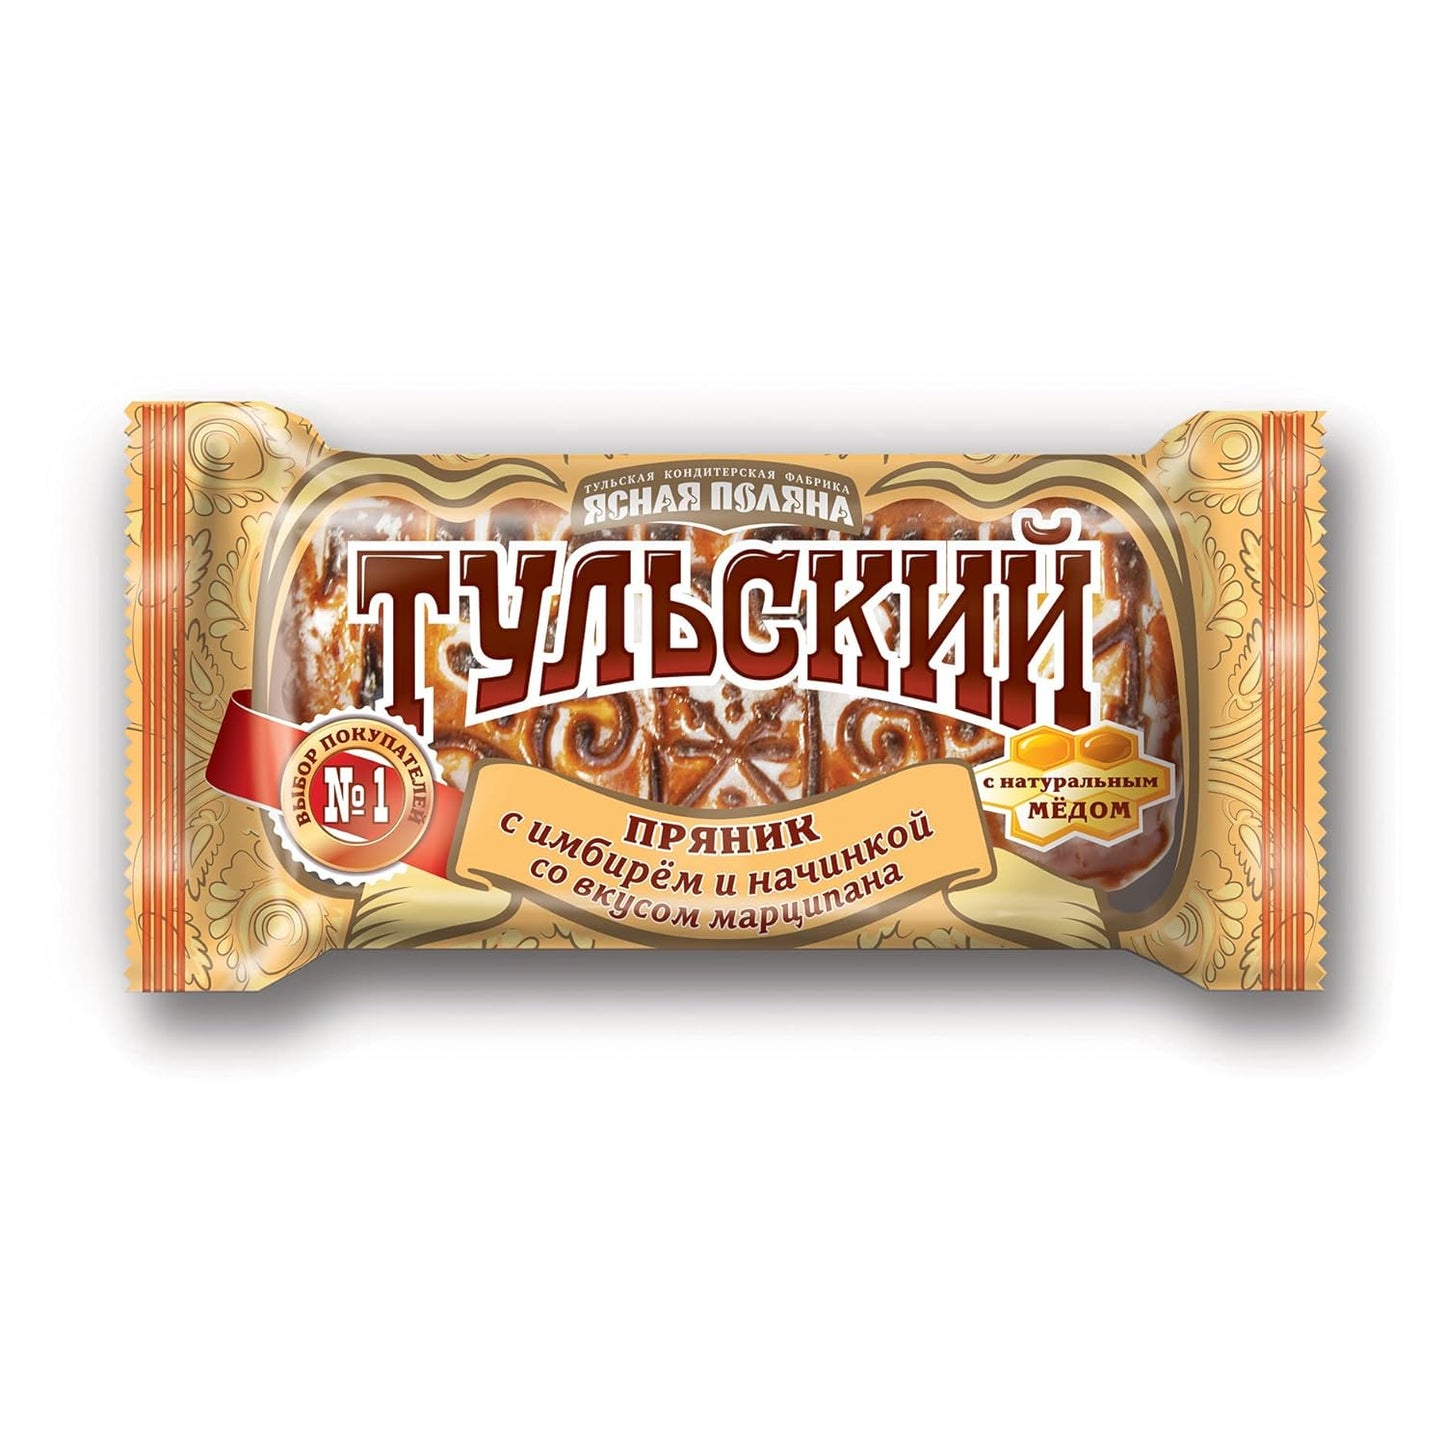 Gingerbread Tulskiy Pryaniki With Ginger and Marzipan Filling 140g/4.93oz